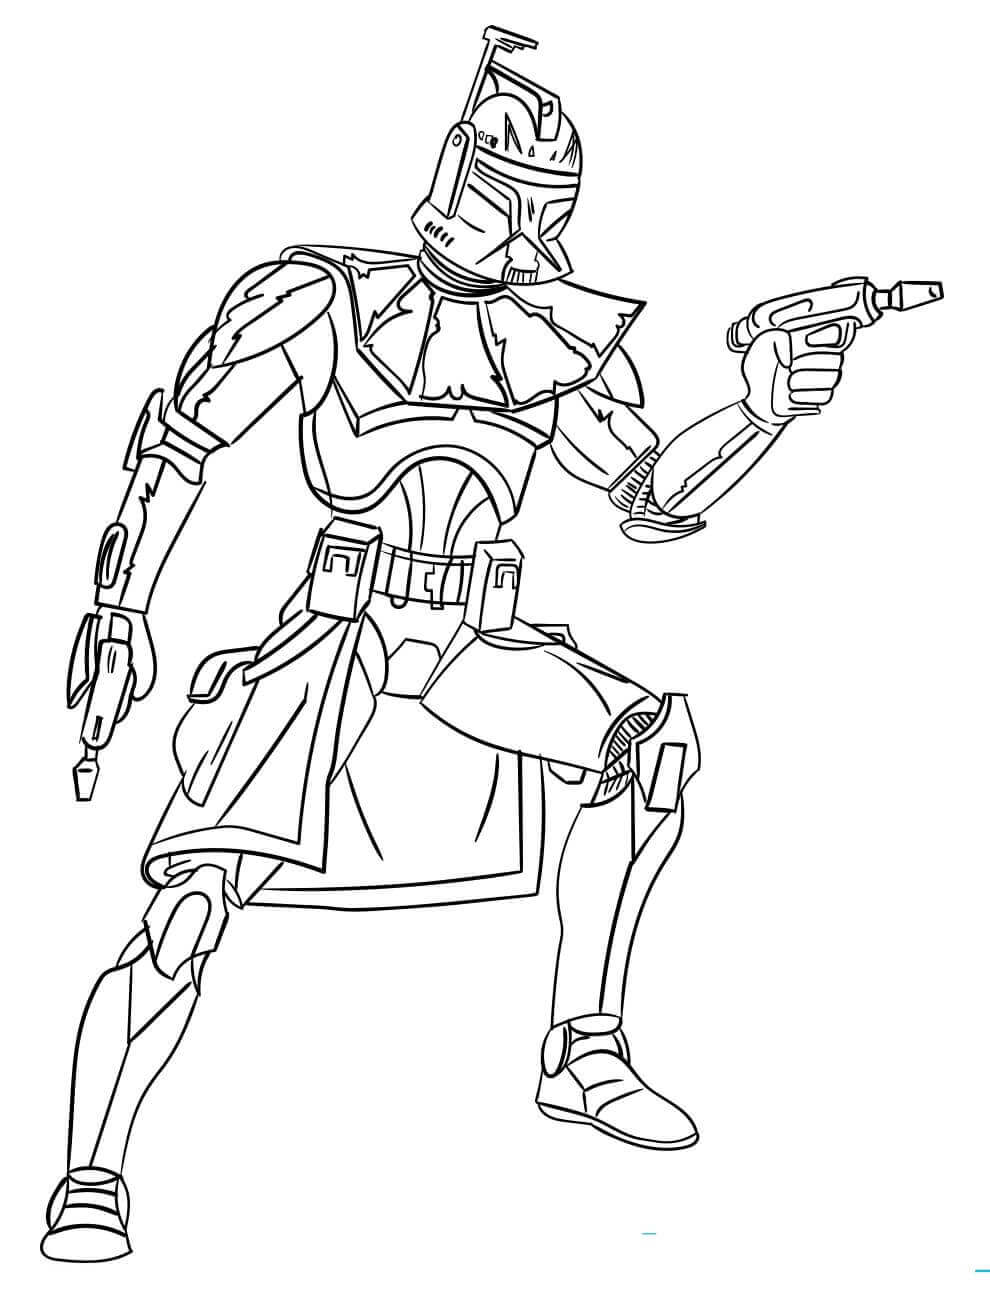 Captain Rex from Star Wars coloring page